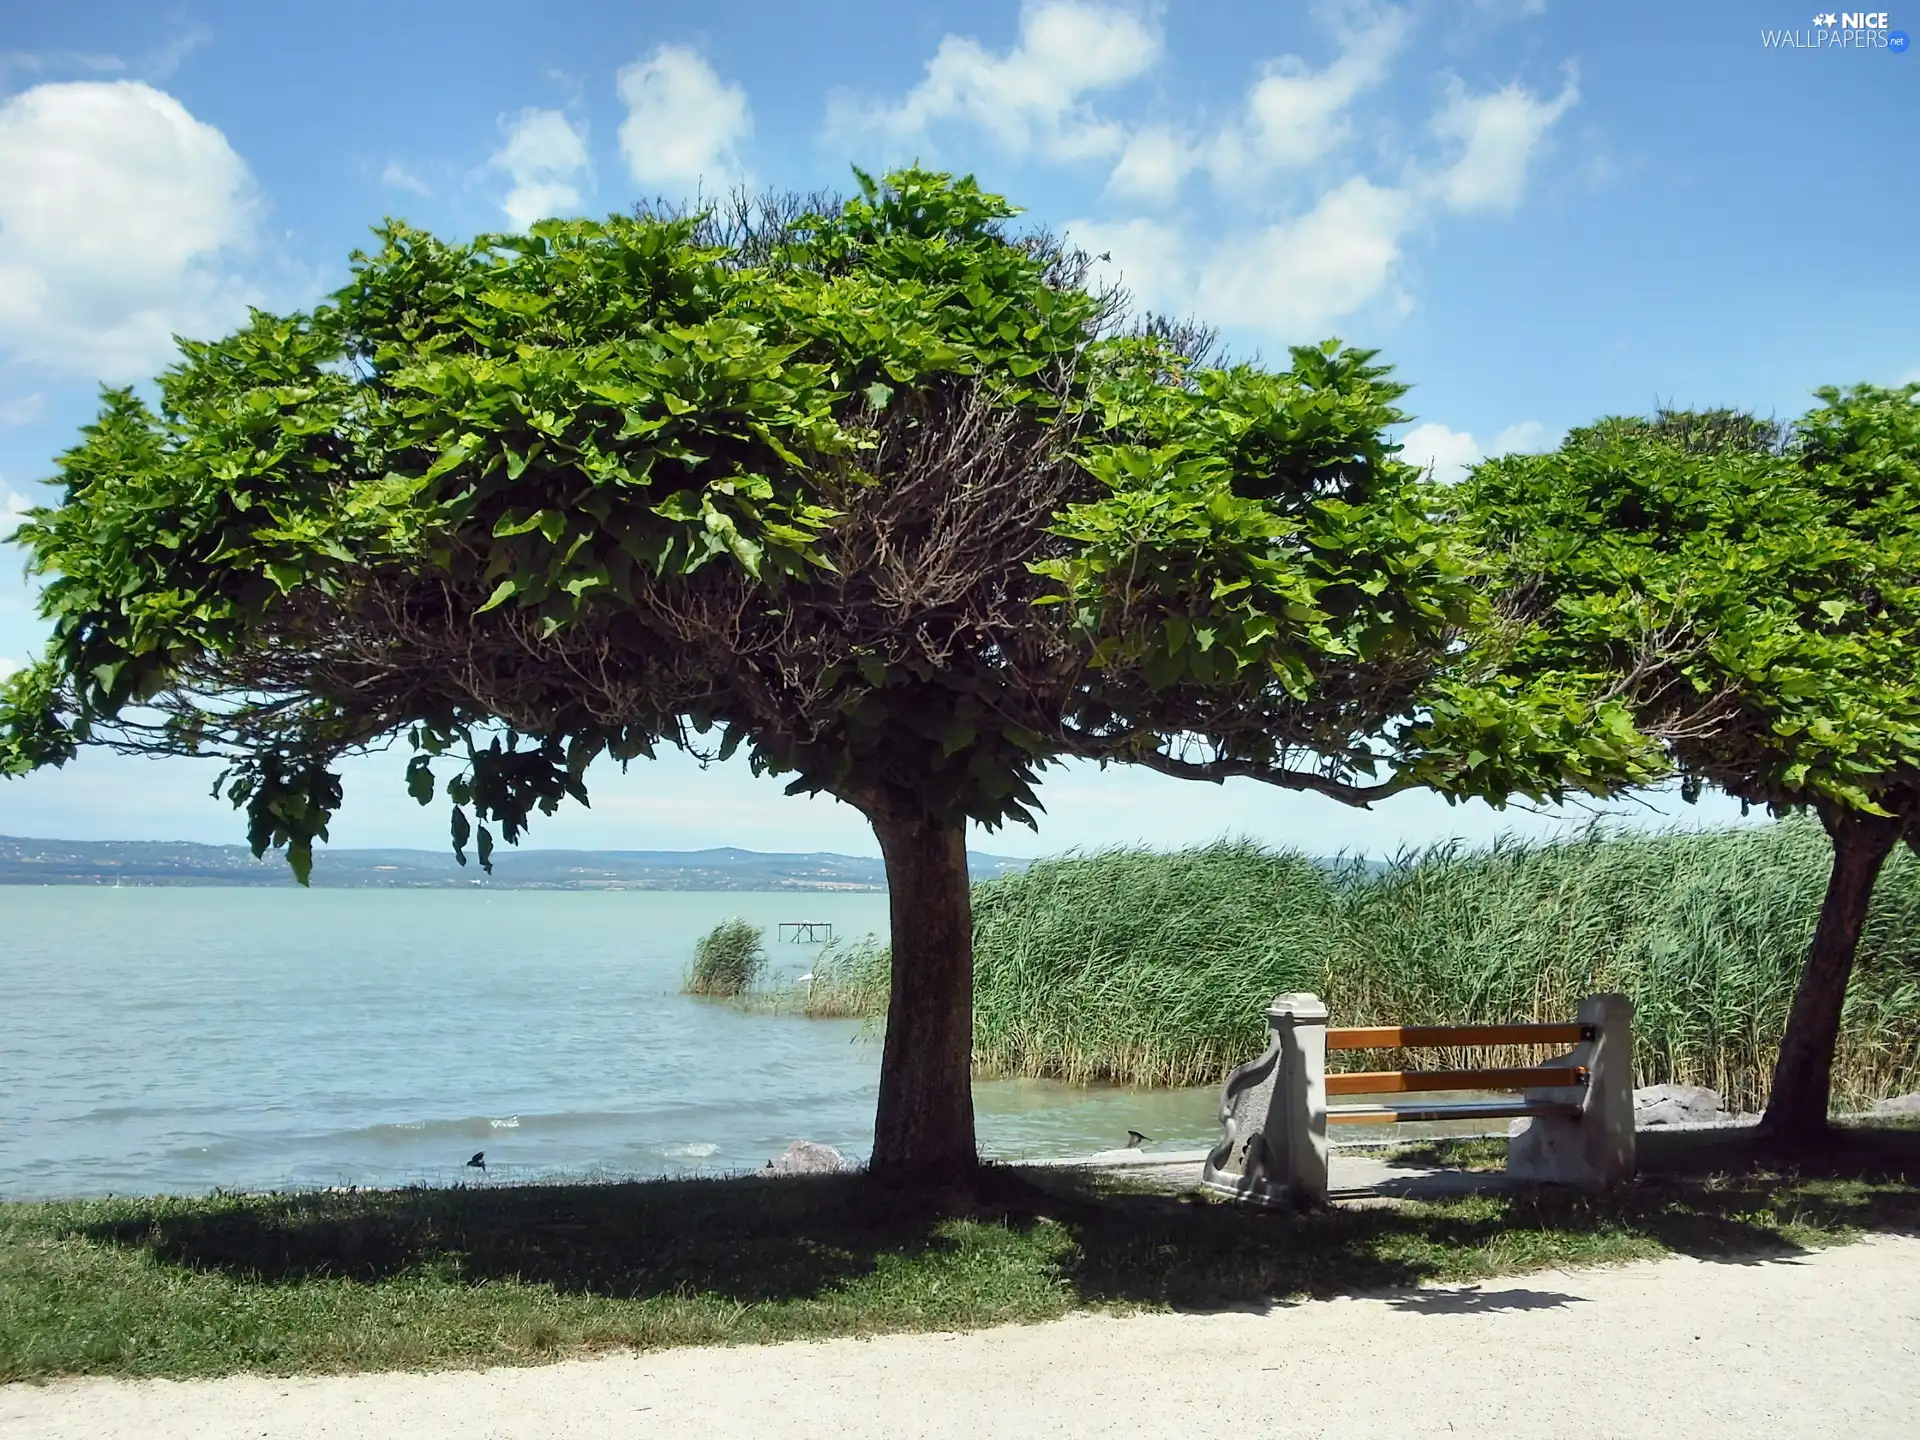 Bench, resting, trees, viewes, lake